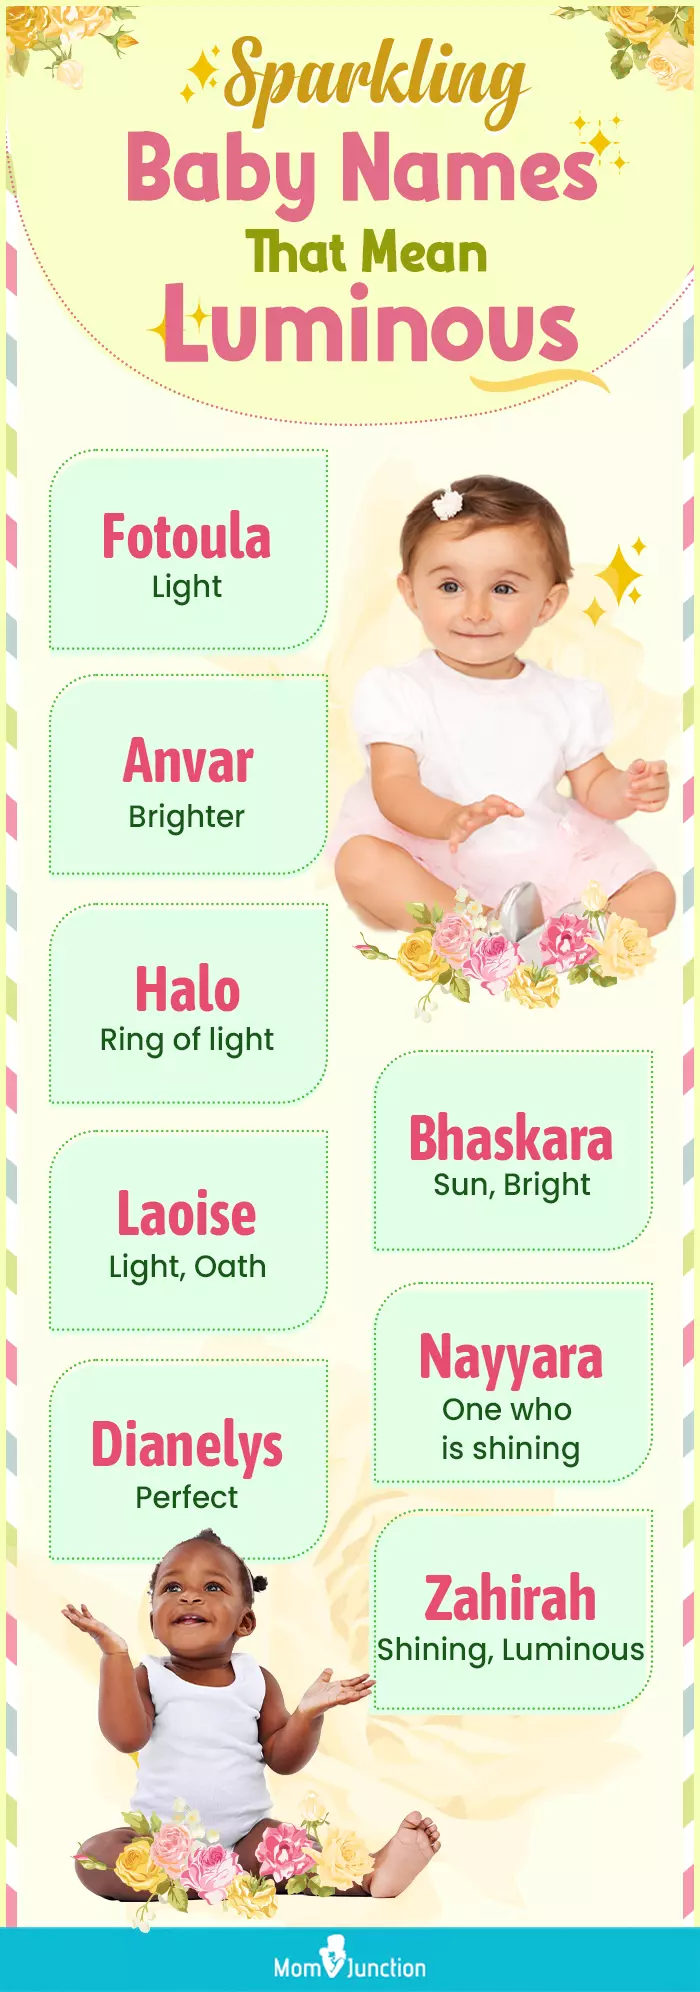 sparkling baby names that mean luminous (infographic)